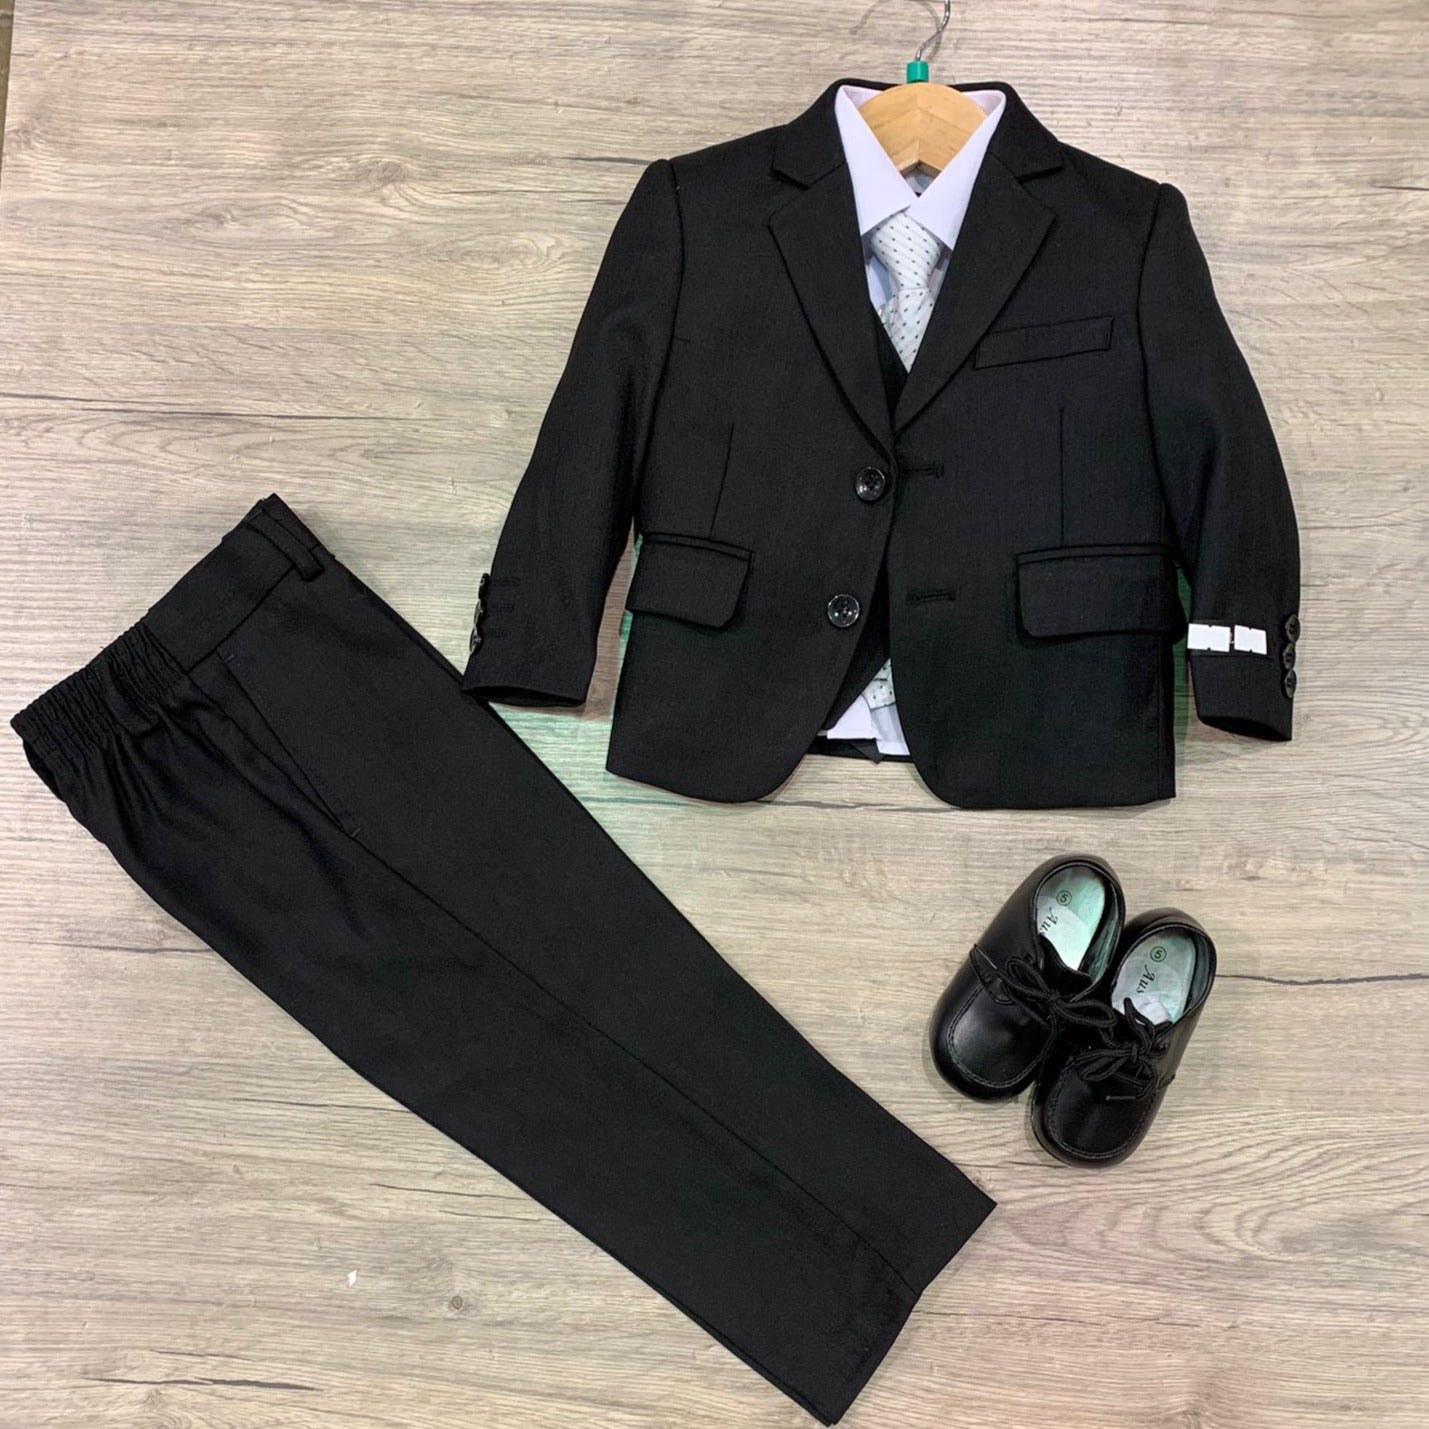 The Baby Suit Formal Boys Suit